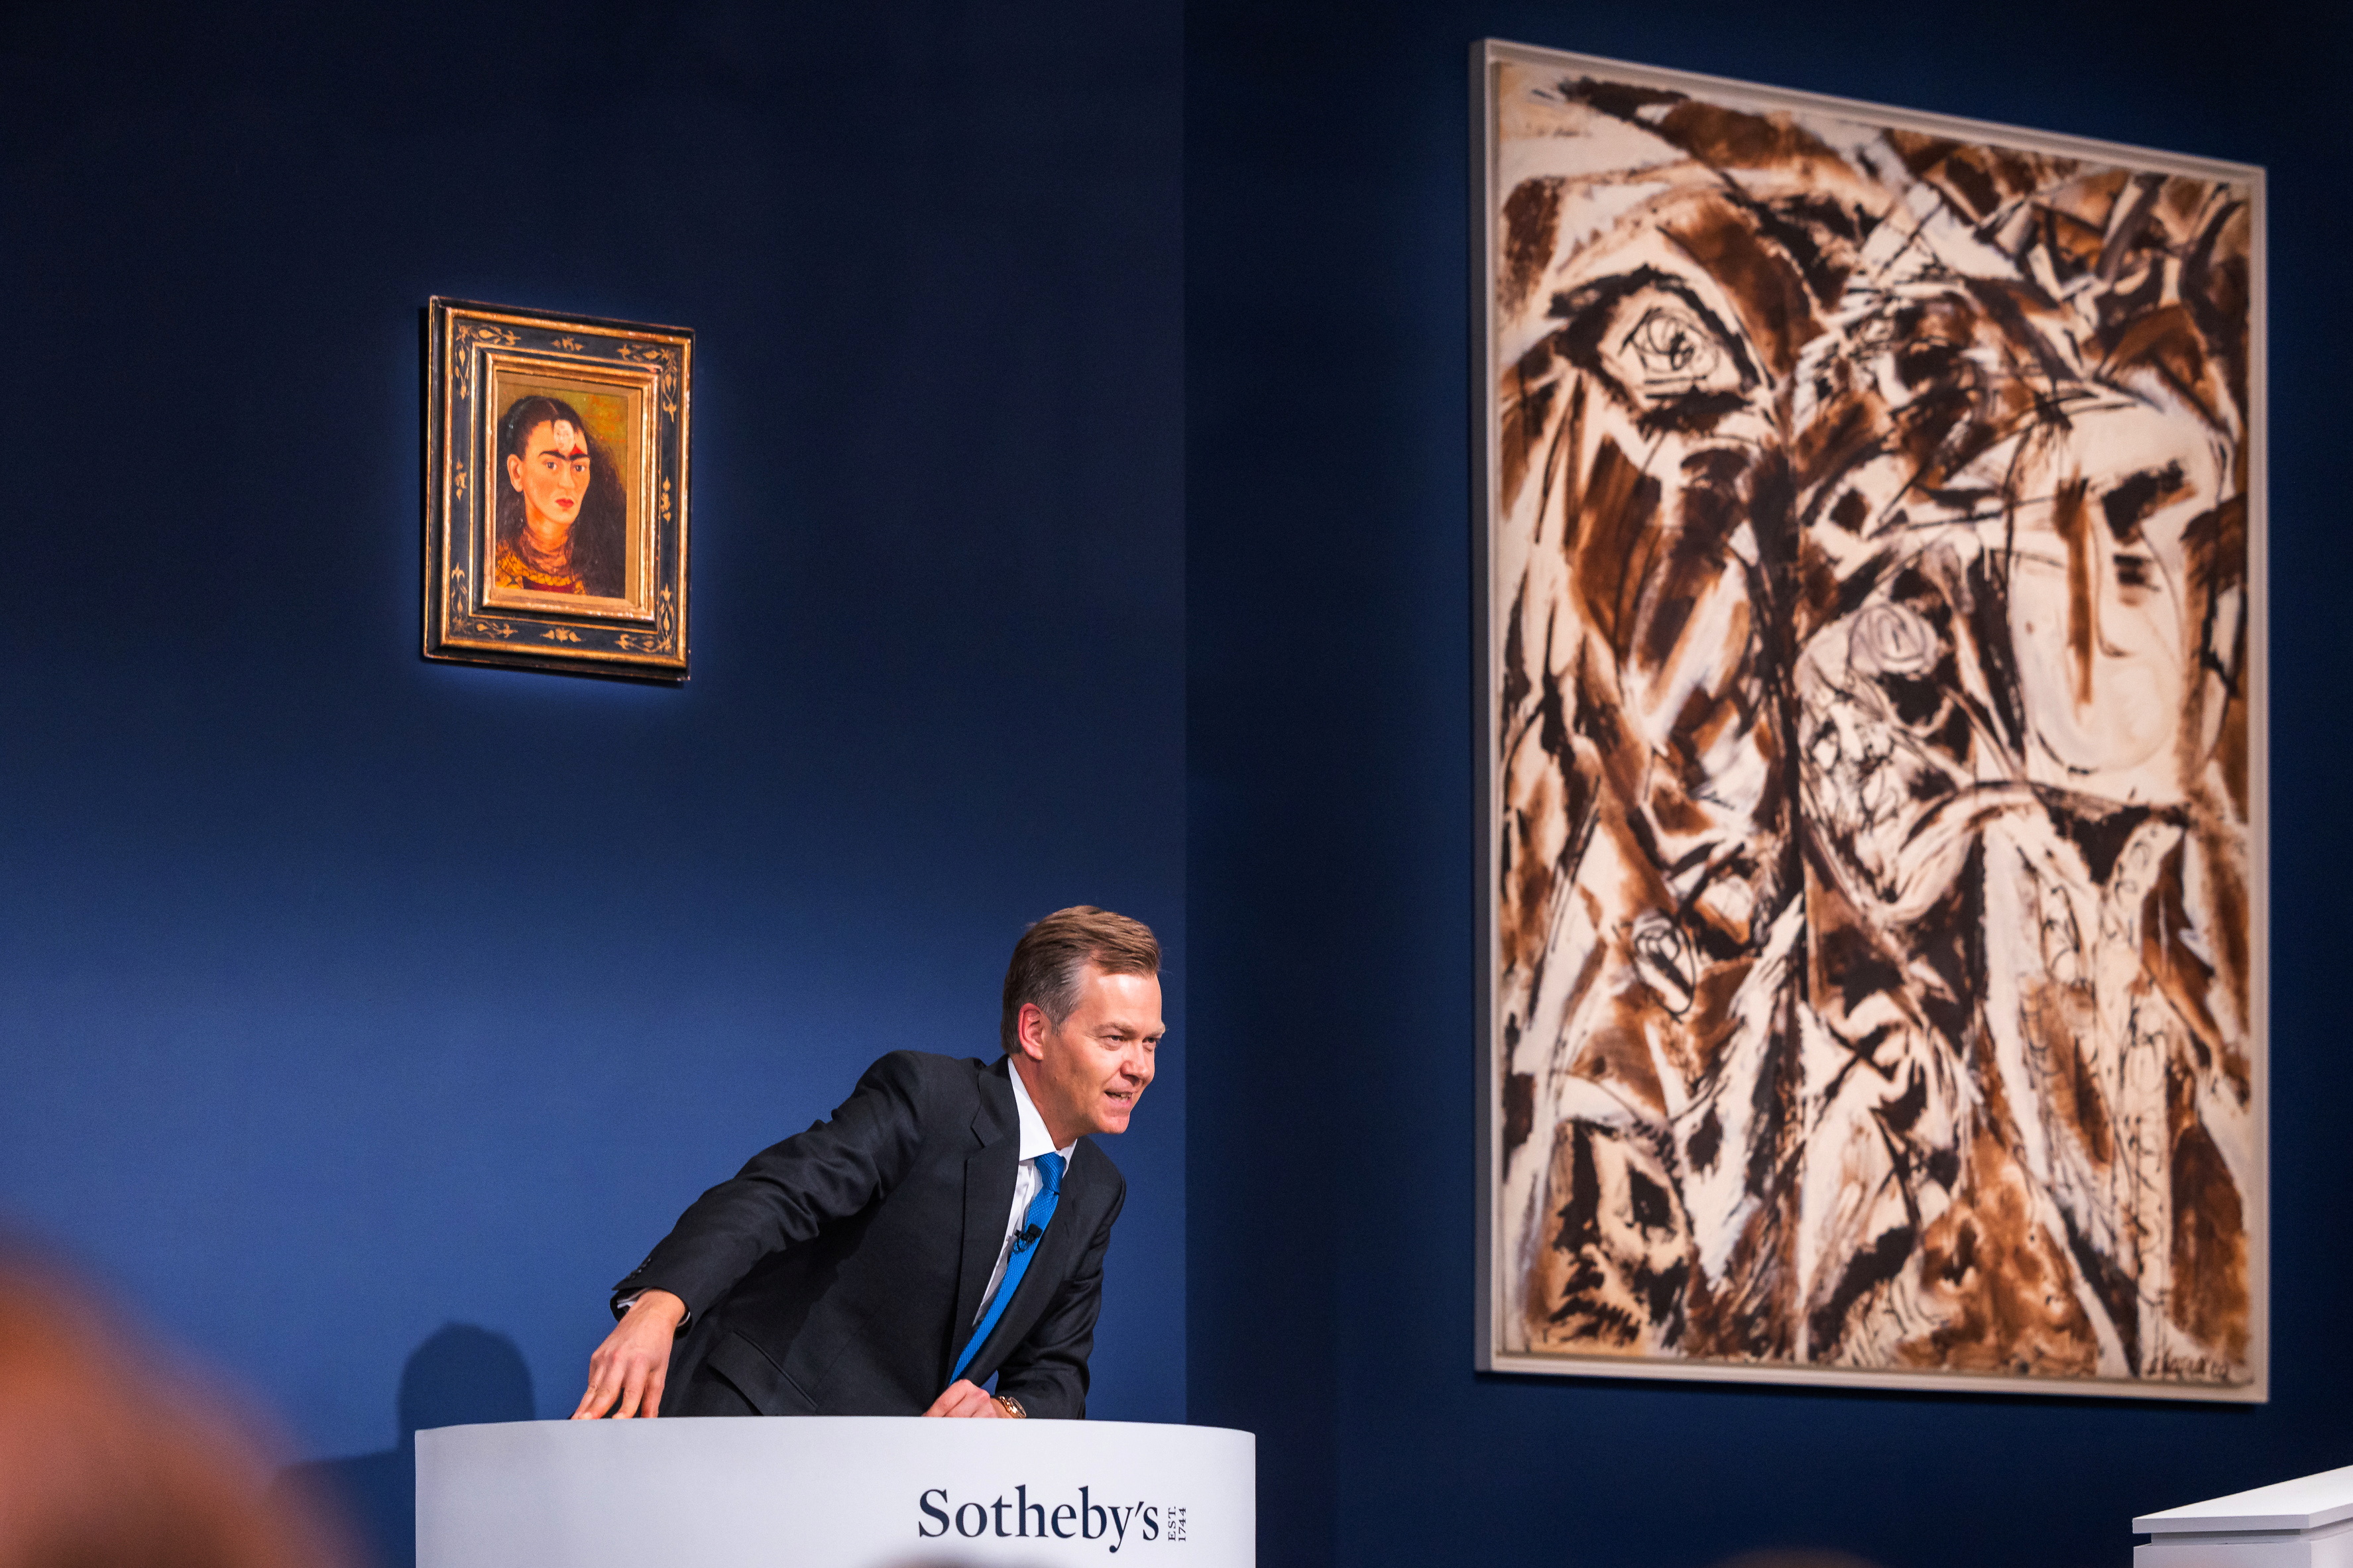 Auctioneer Oliver Barker, Chairman of Sotheby's Europe, sells a Frida Kahlo self portrait for $34.9 Million USD during an art auction, in the Manhattan borough of New York City, New York, U.S., November 16, 2021.  Julian Cassady/SOTHEBY'S/Handout via REUTERS   